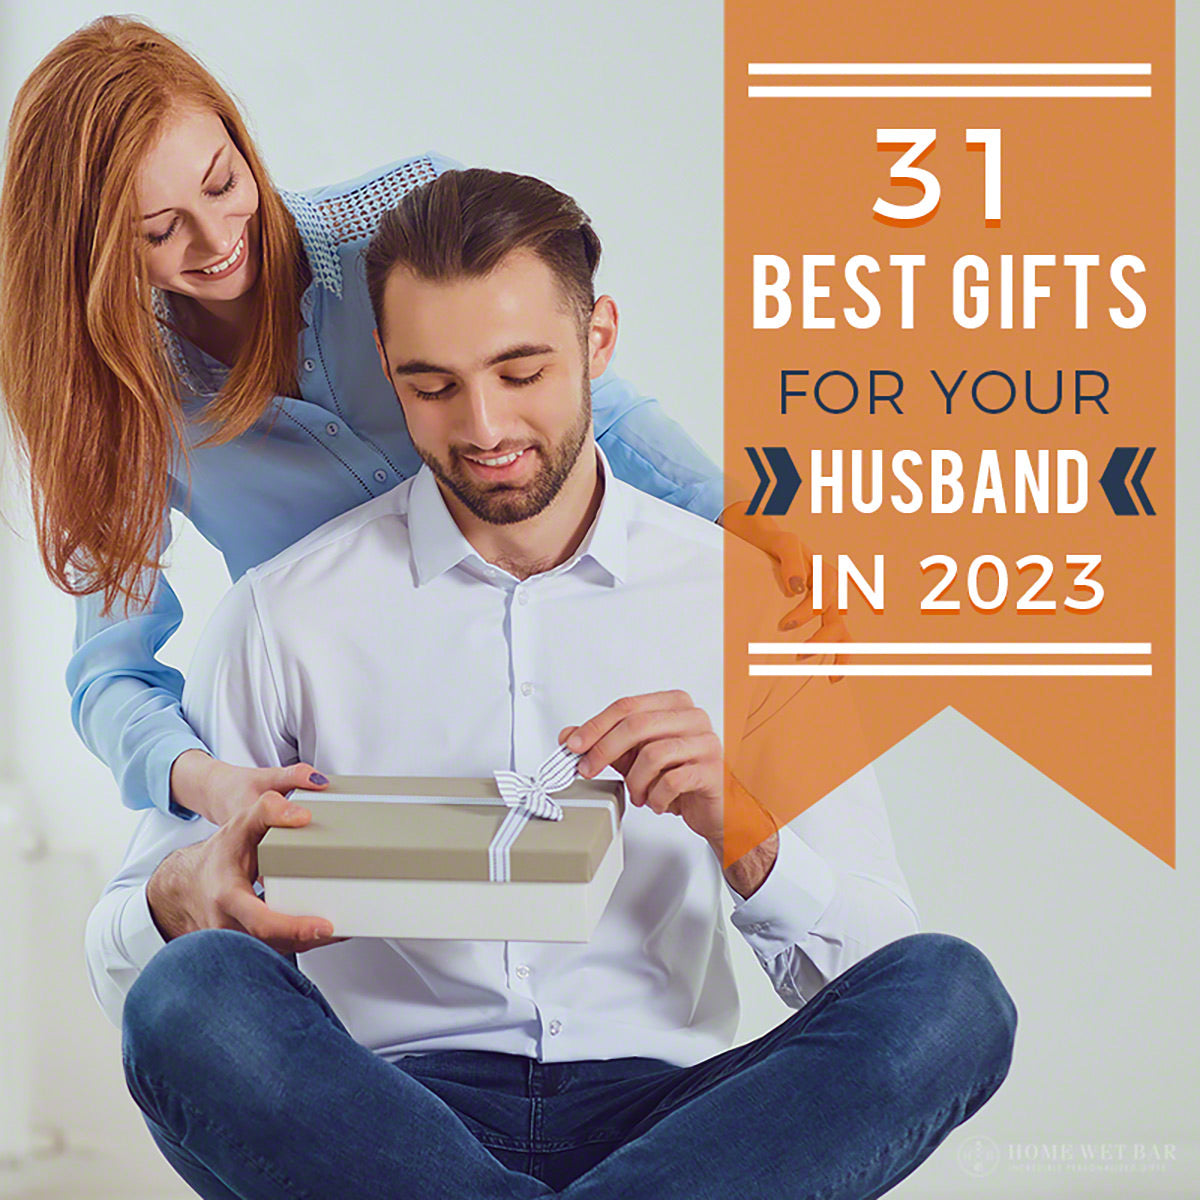 Gifts for Wife - Gifts for Her - Happy Anniversary Wedding Gifts - Wife  Gifts from Husband - Wife Birthday Gift Ideas - Christmas Gifts for Wife -  Romantic Gifts for Her -